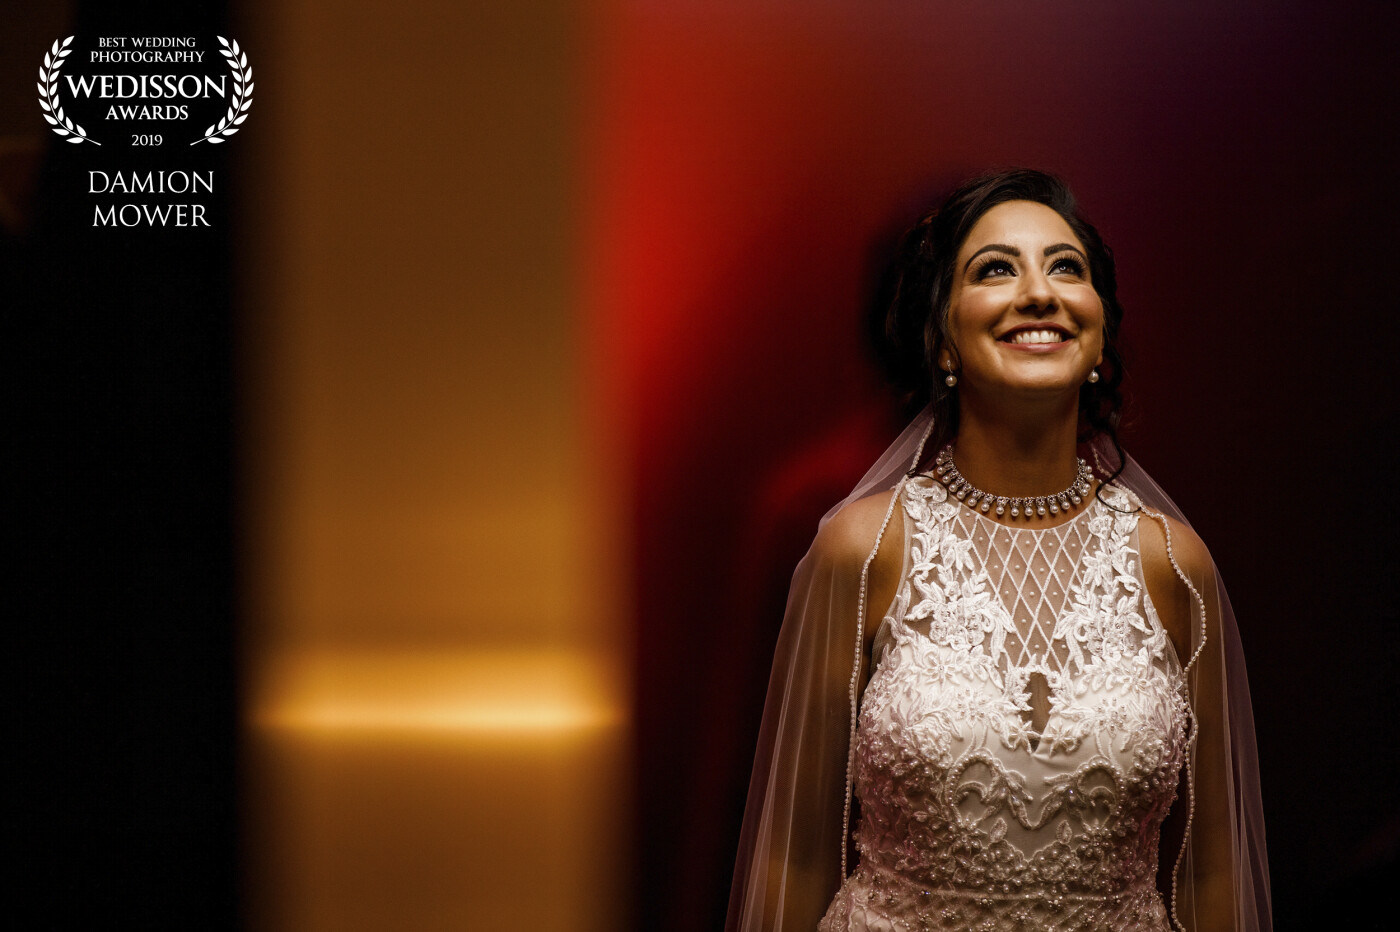 This was captured at a lovely Indian wedding late last year. <br />
The bridal shot was captured in a lift with the gold reflecting from the lift door as it closed and the red was the carpeted lift sides.